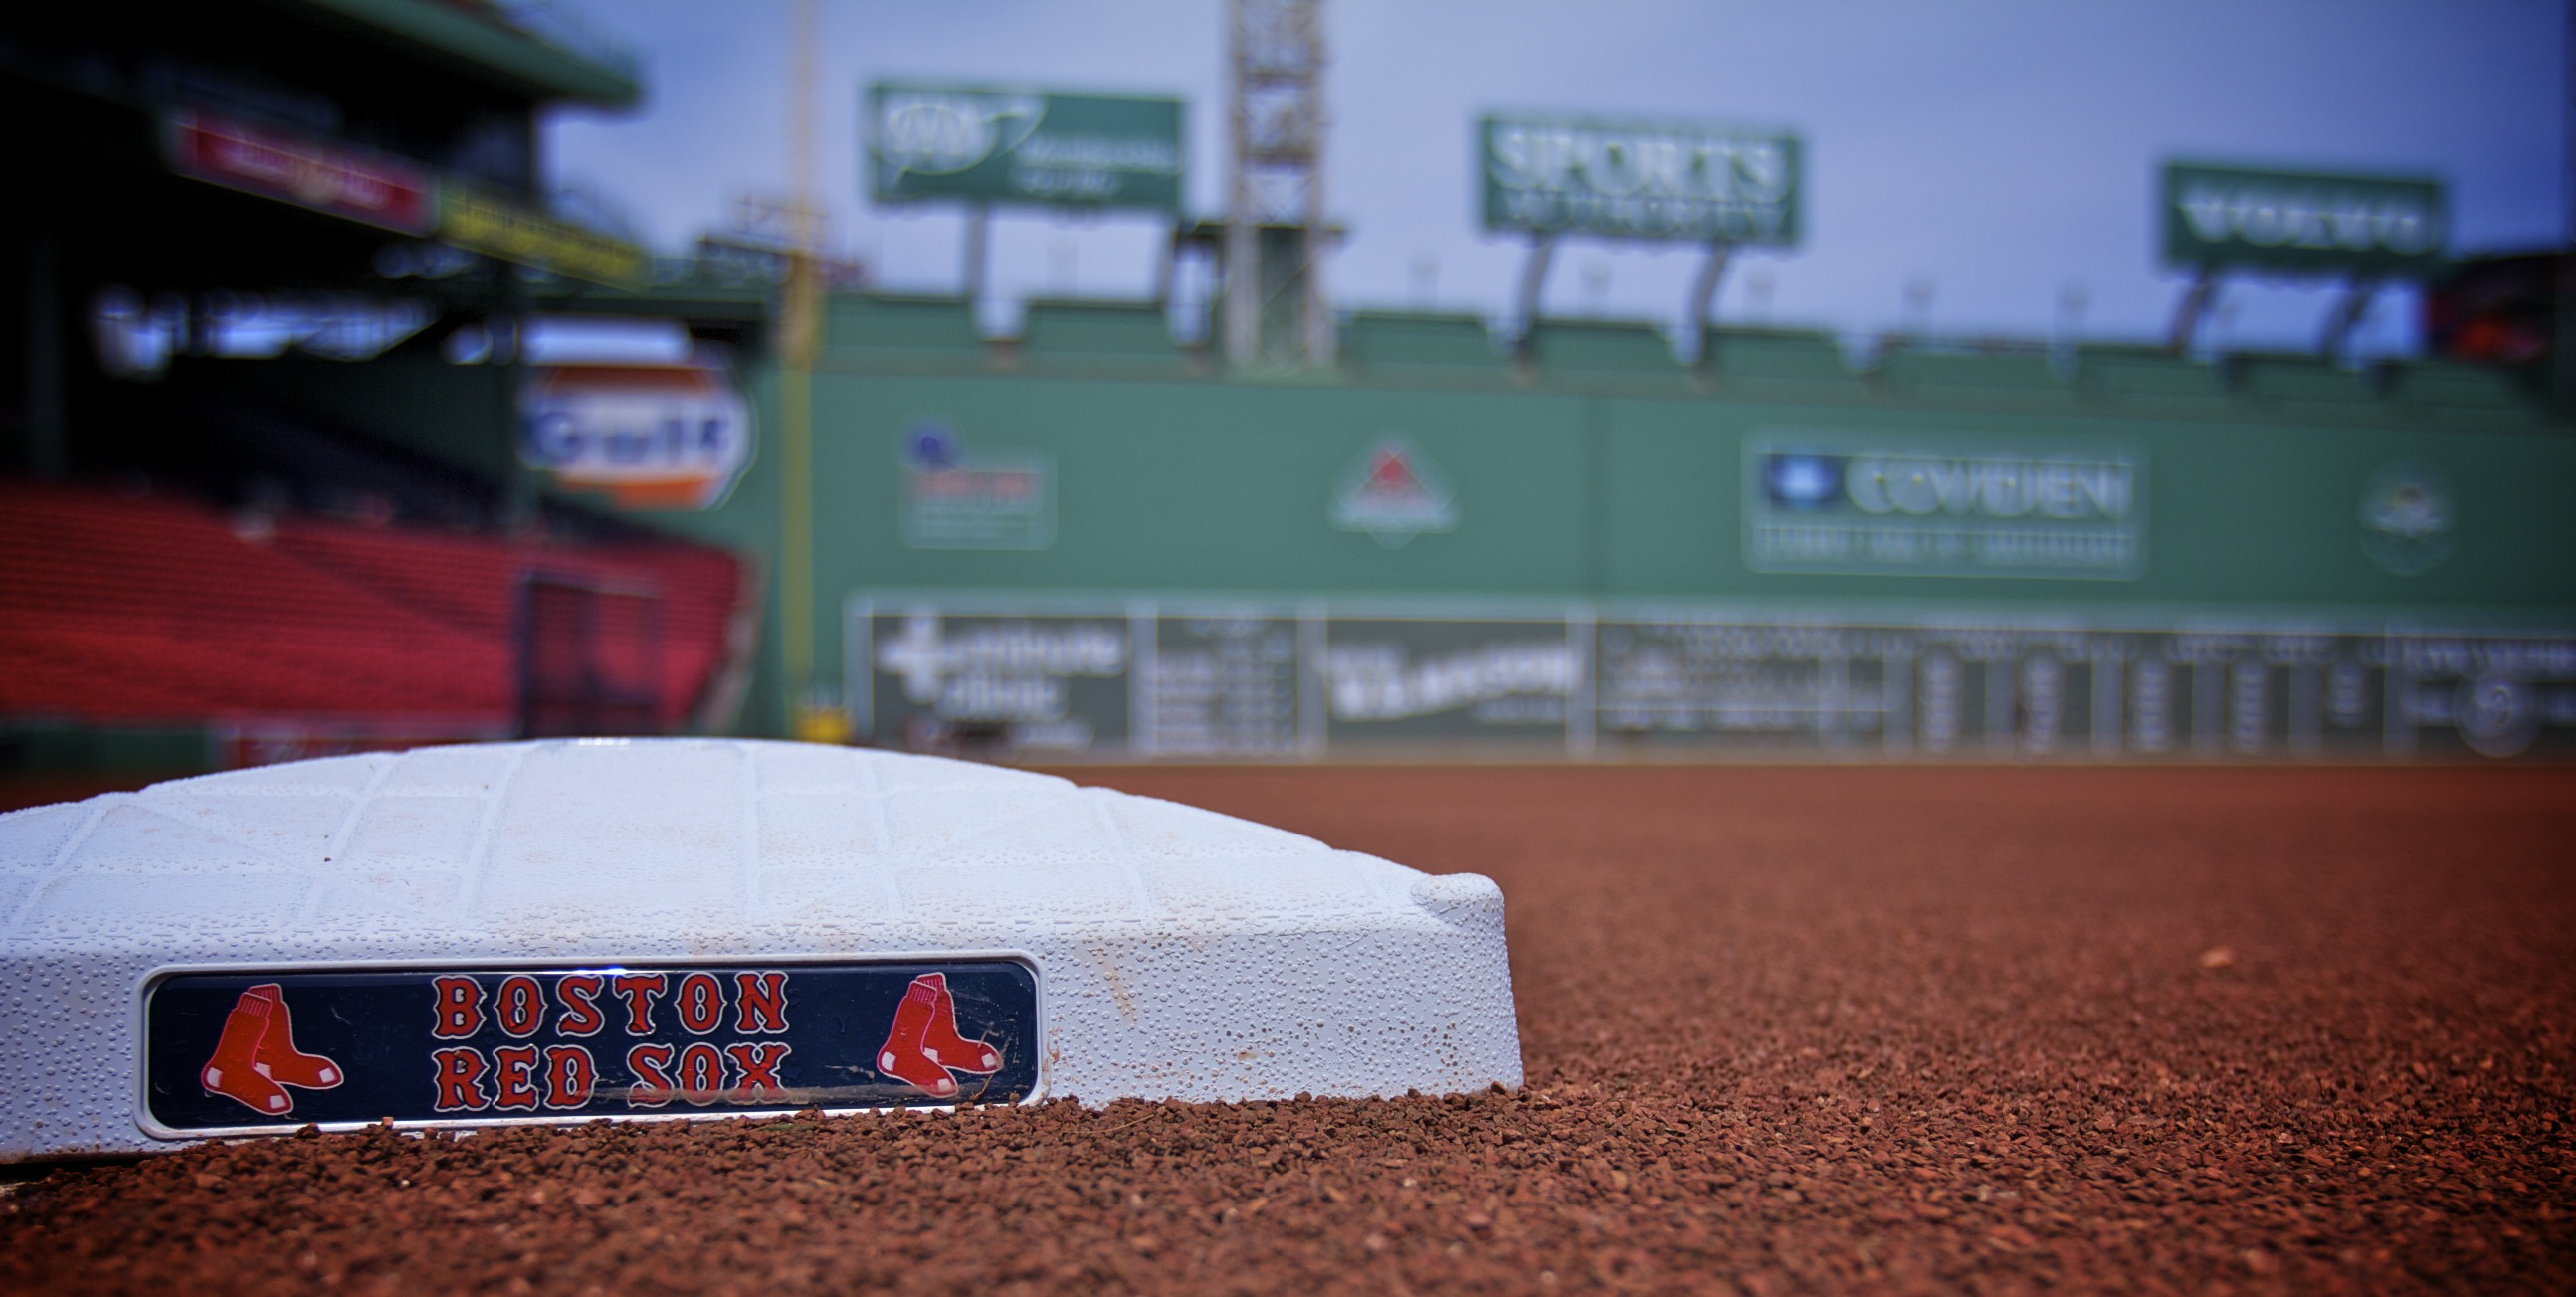 2589x1304 Any good high res wallpapers out there? I've looked everywhere! : r/redsox